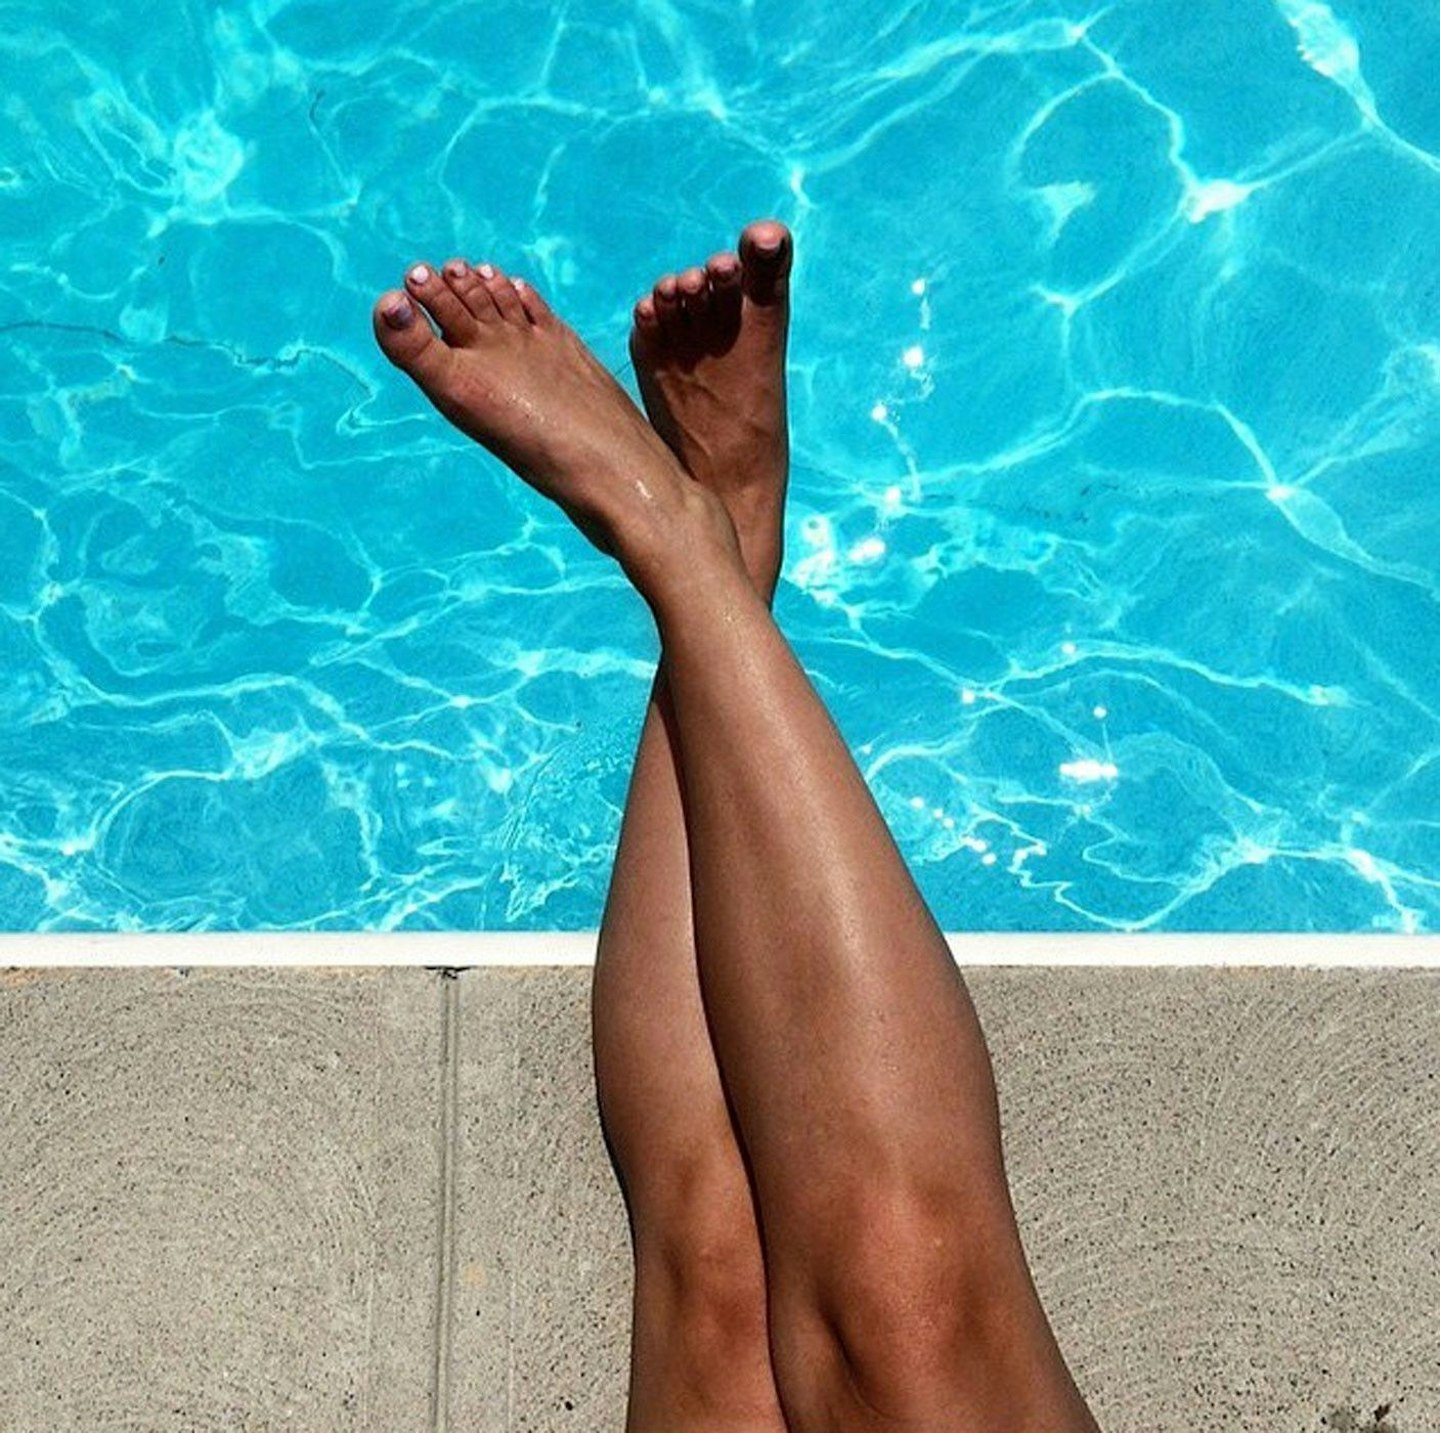 Legs by the pool